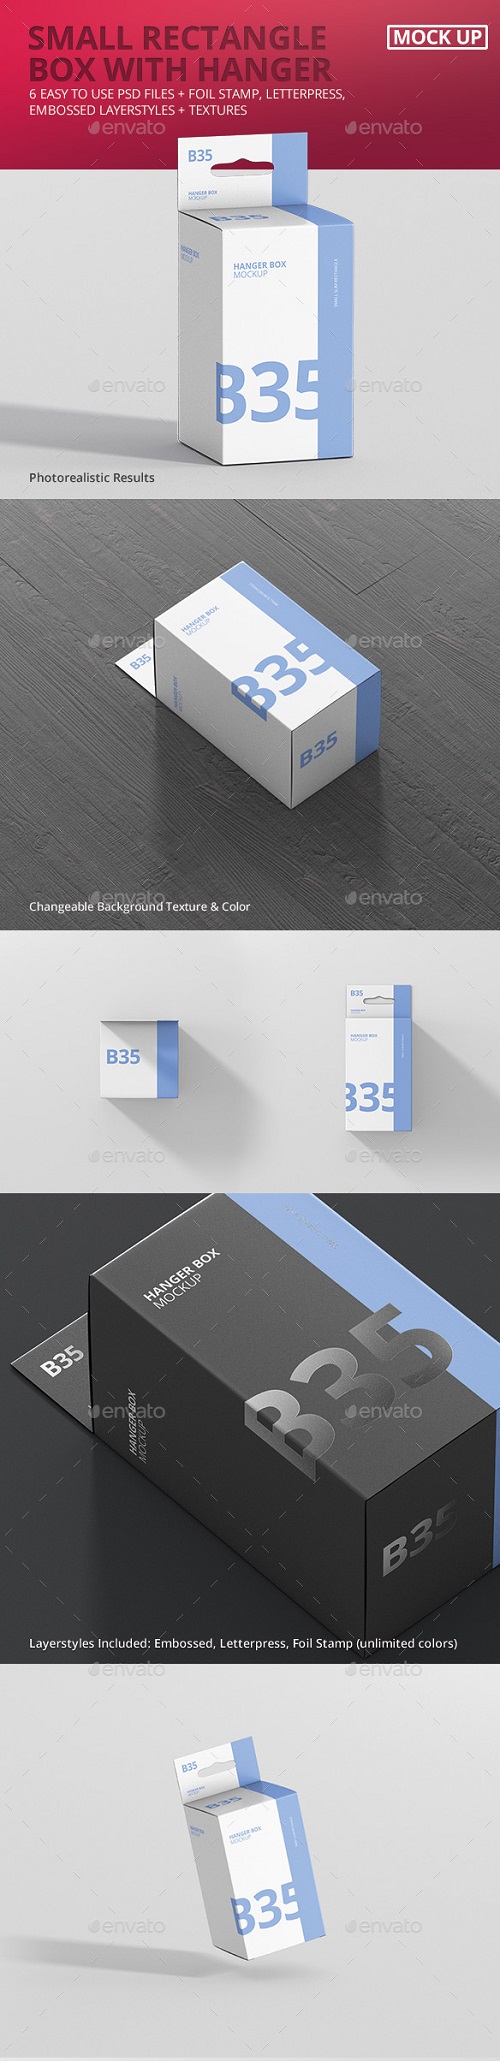 Box Mockup - Small Rectangle Size with Hanger - 21298423